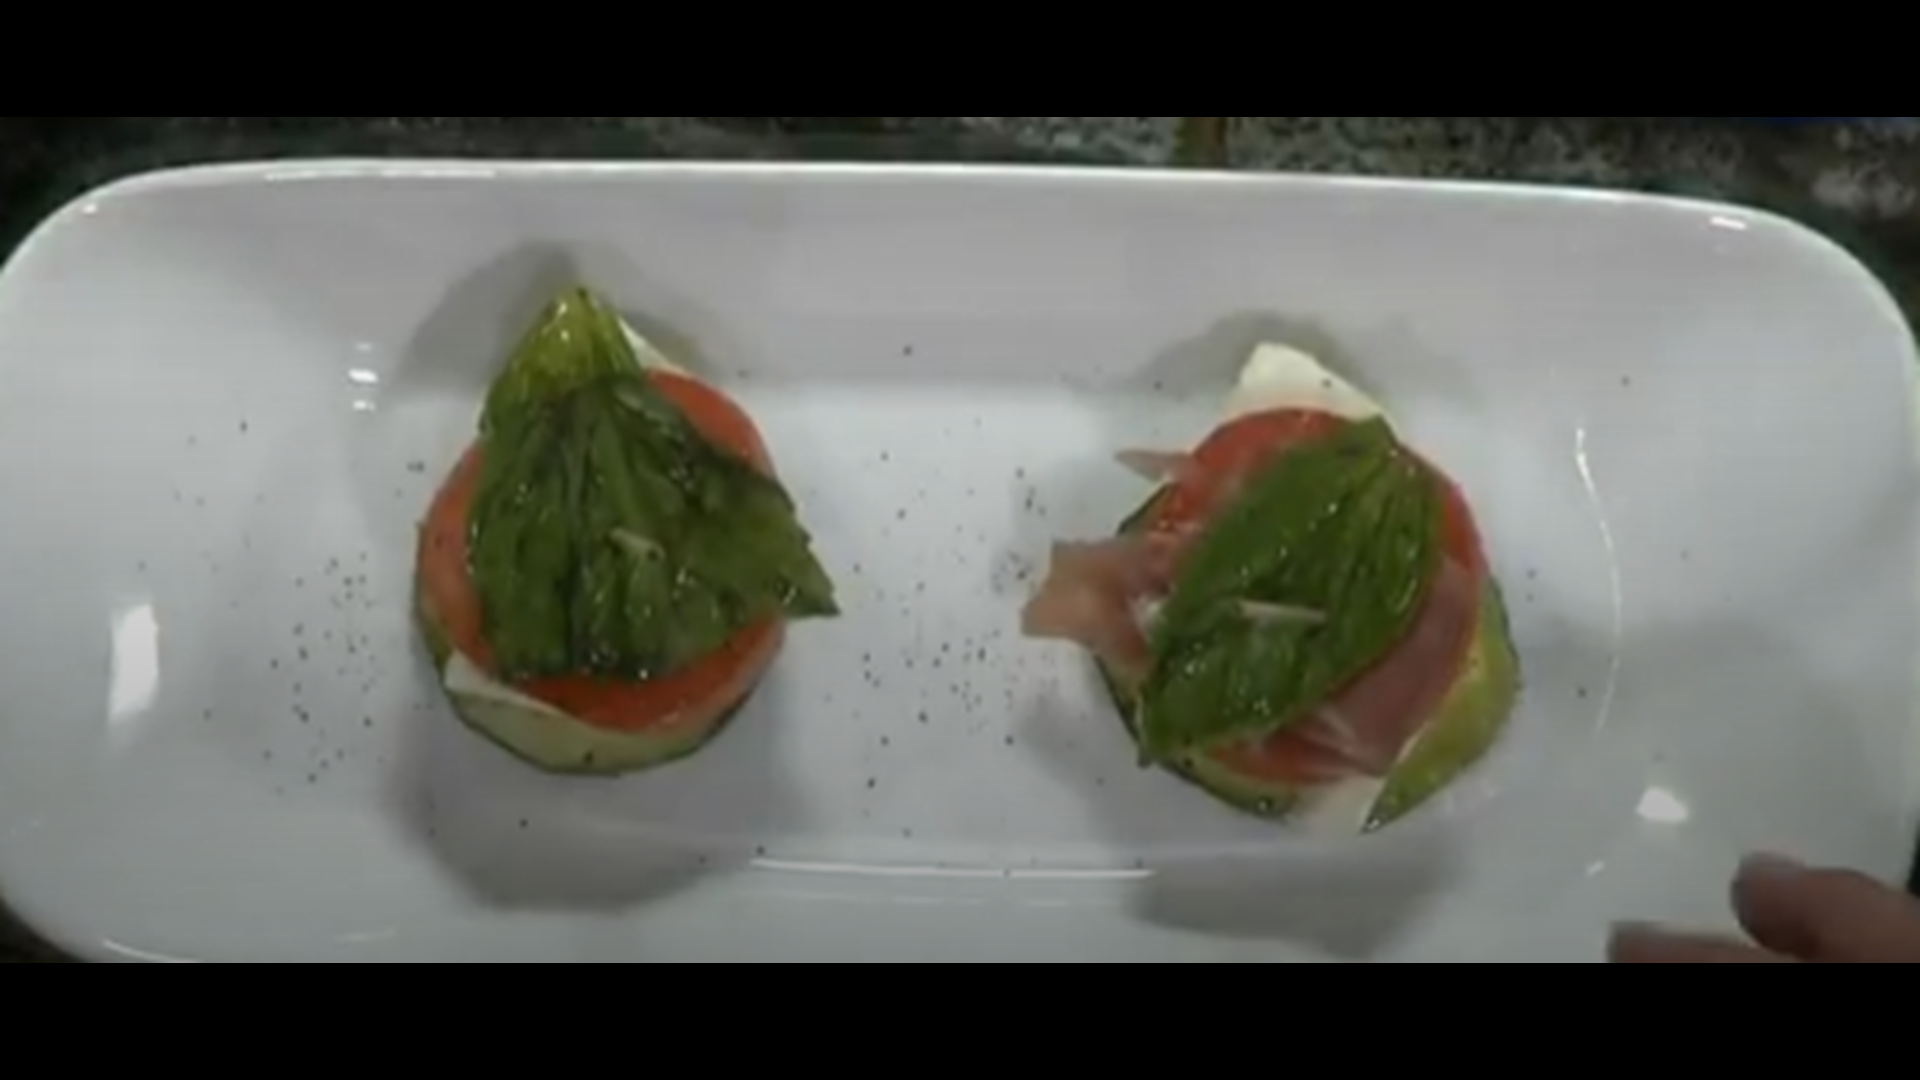 Frankie Pitt from Recipe Realities shows us how to make mini zucchini and prosciutto caprese stacks.